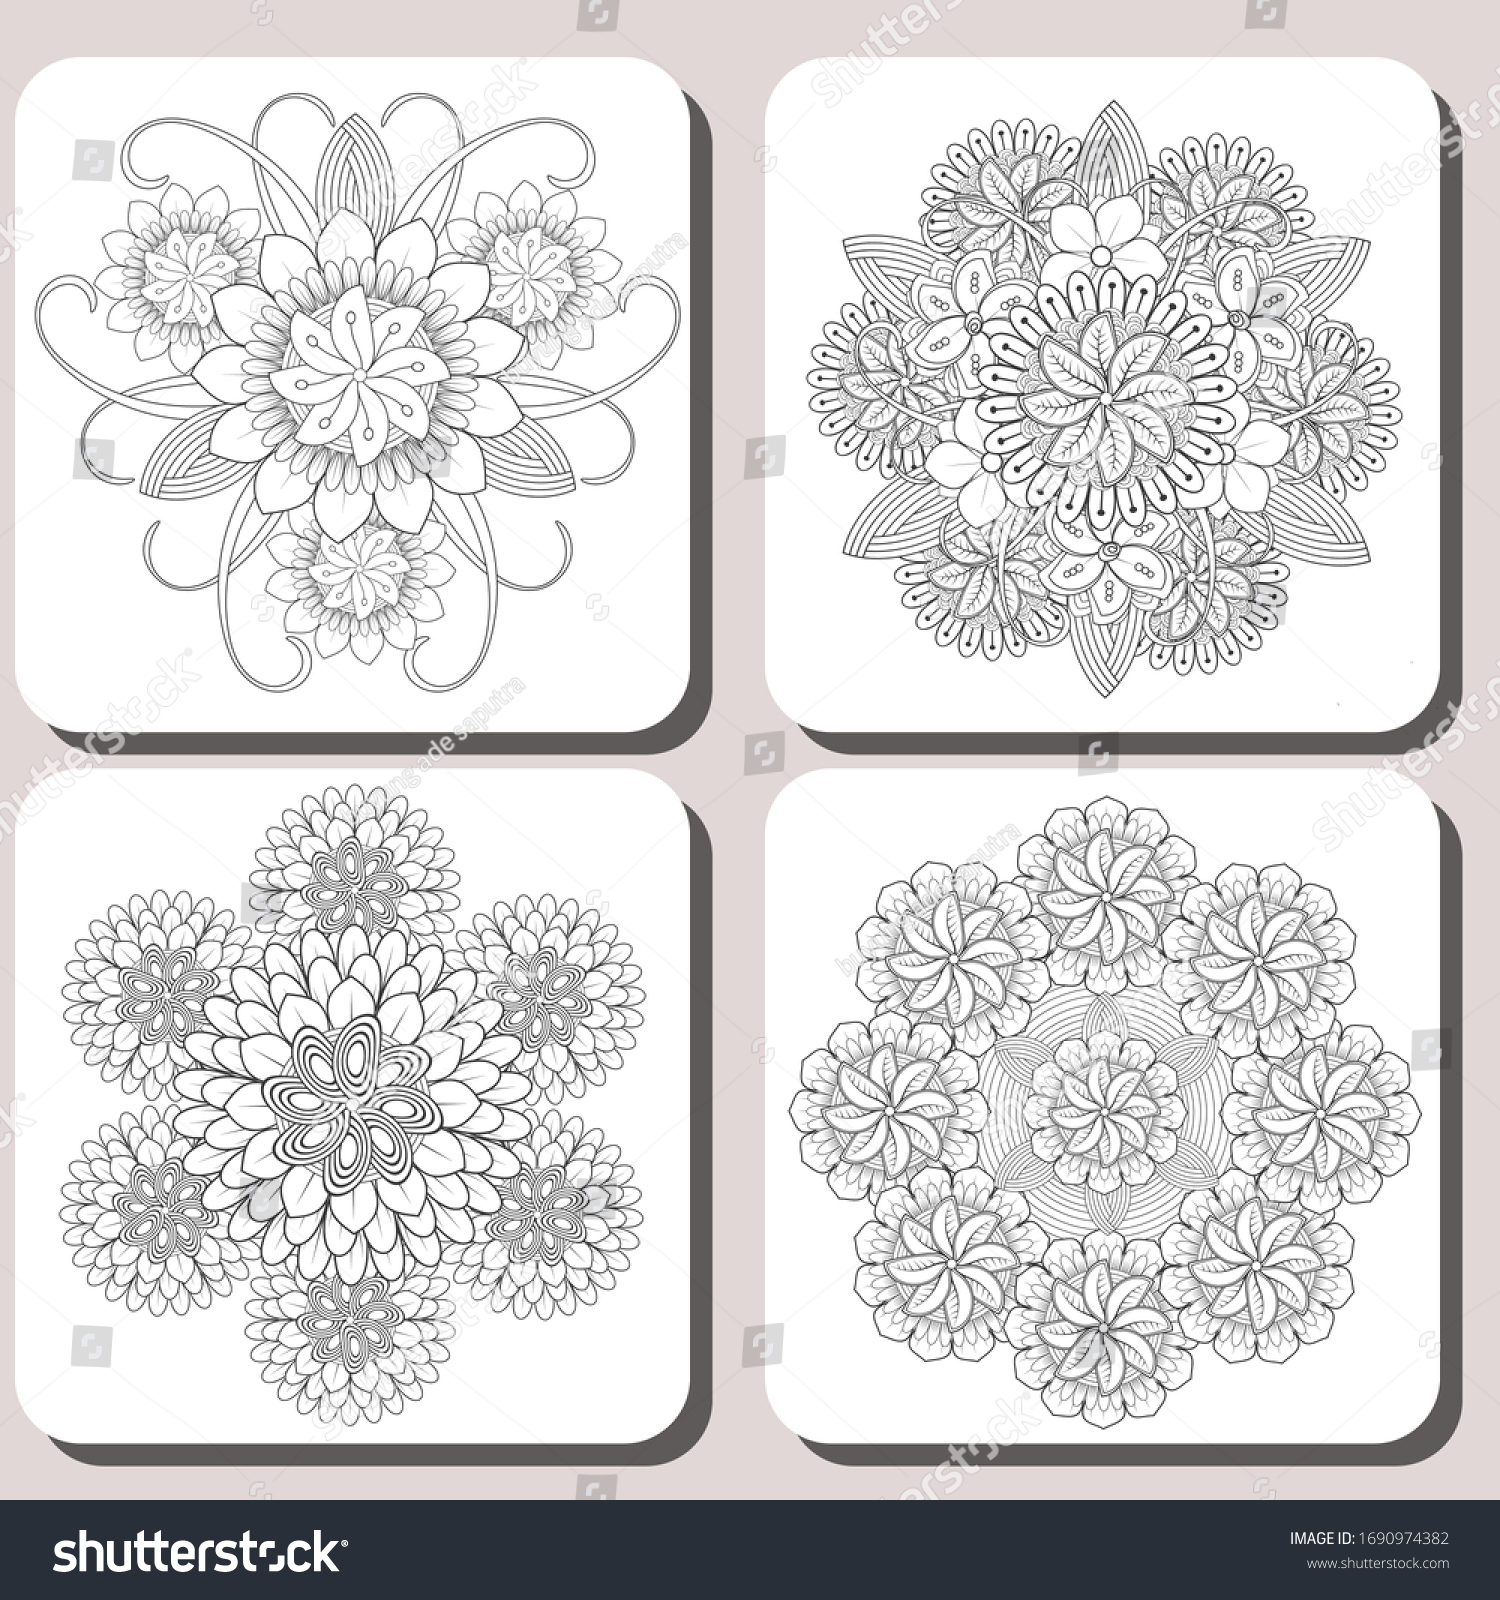 Download Coloring Book Sets Coloring Pages Adult Stock Vector Royalty Free 1690974382